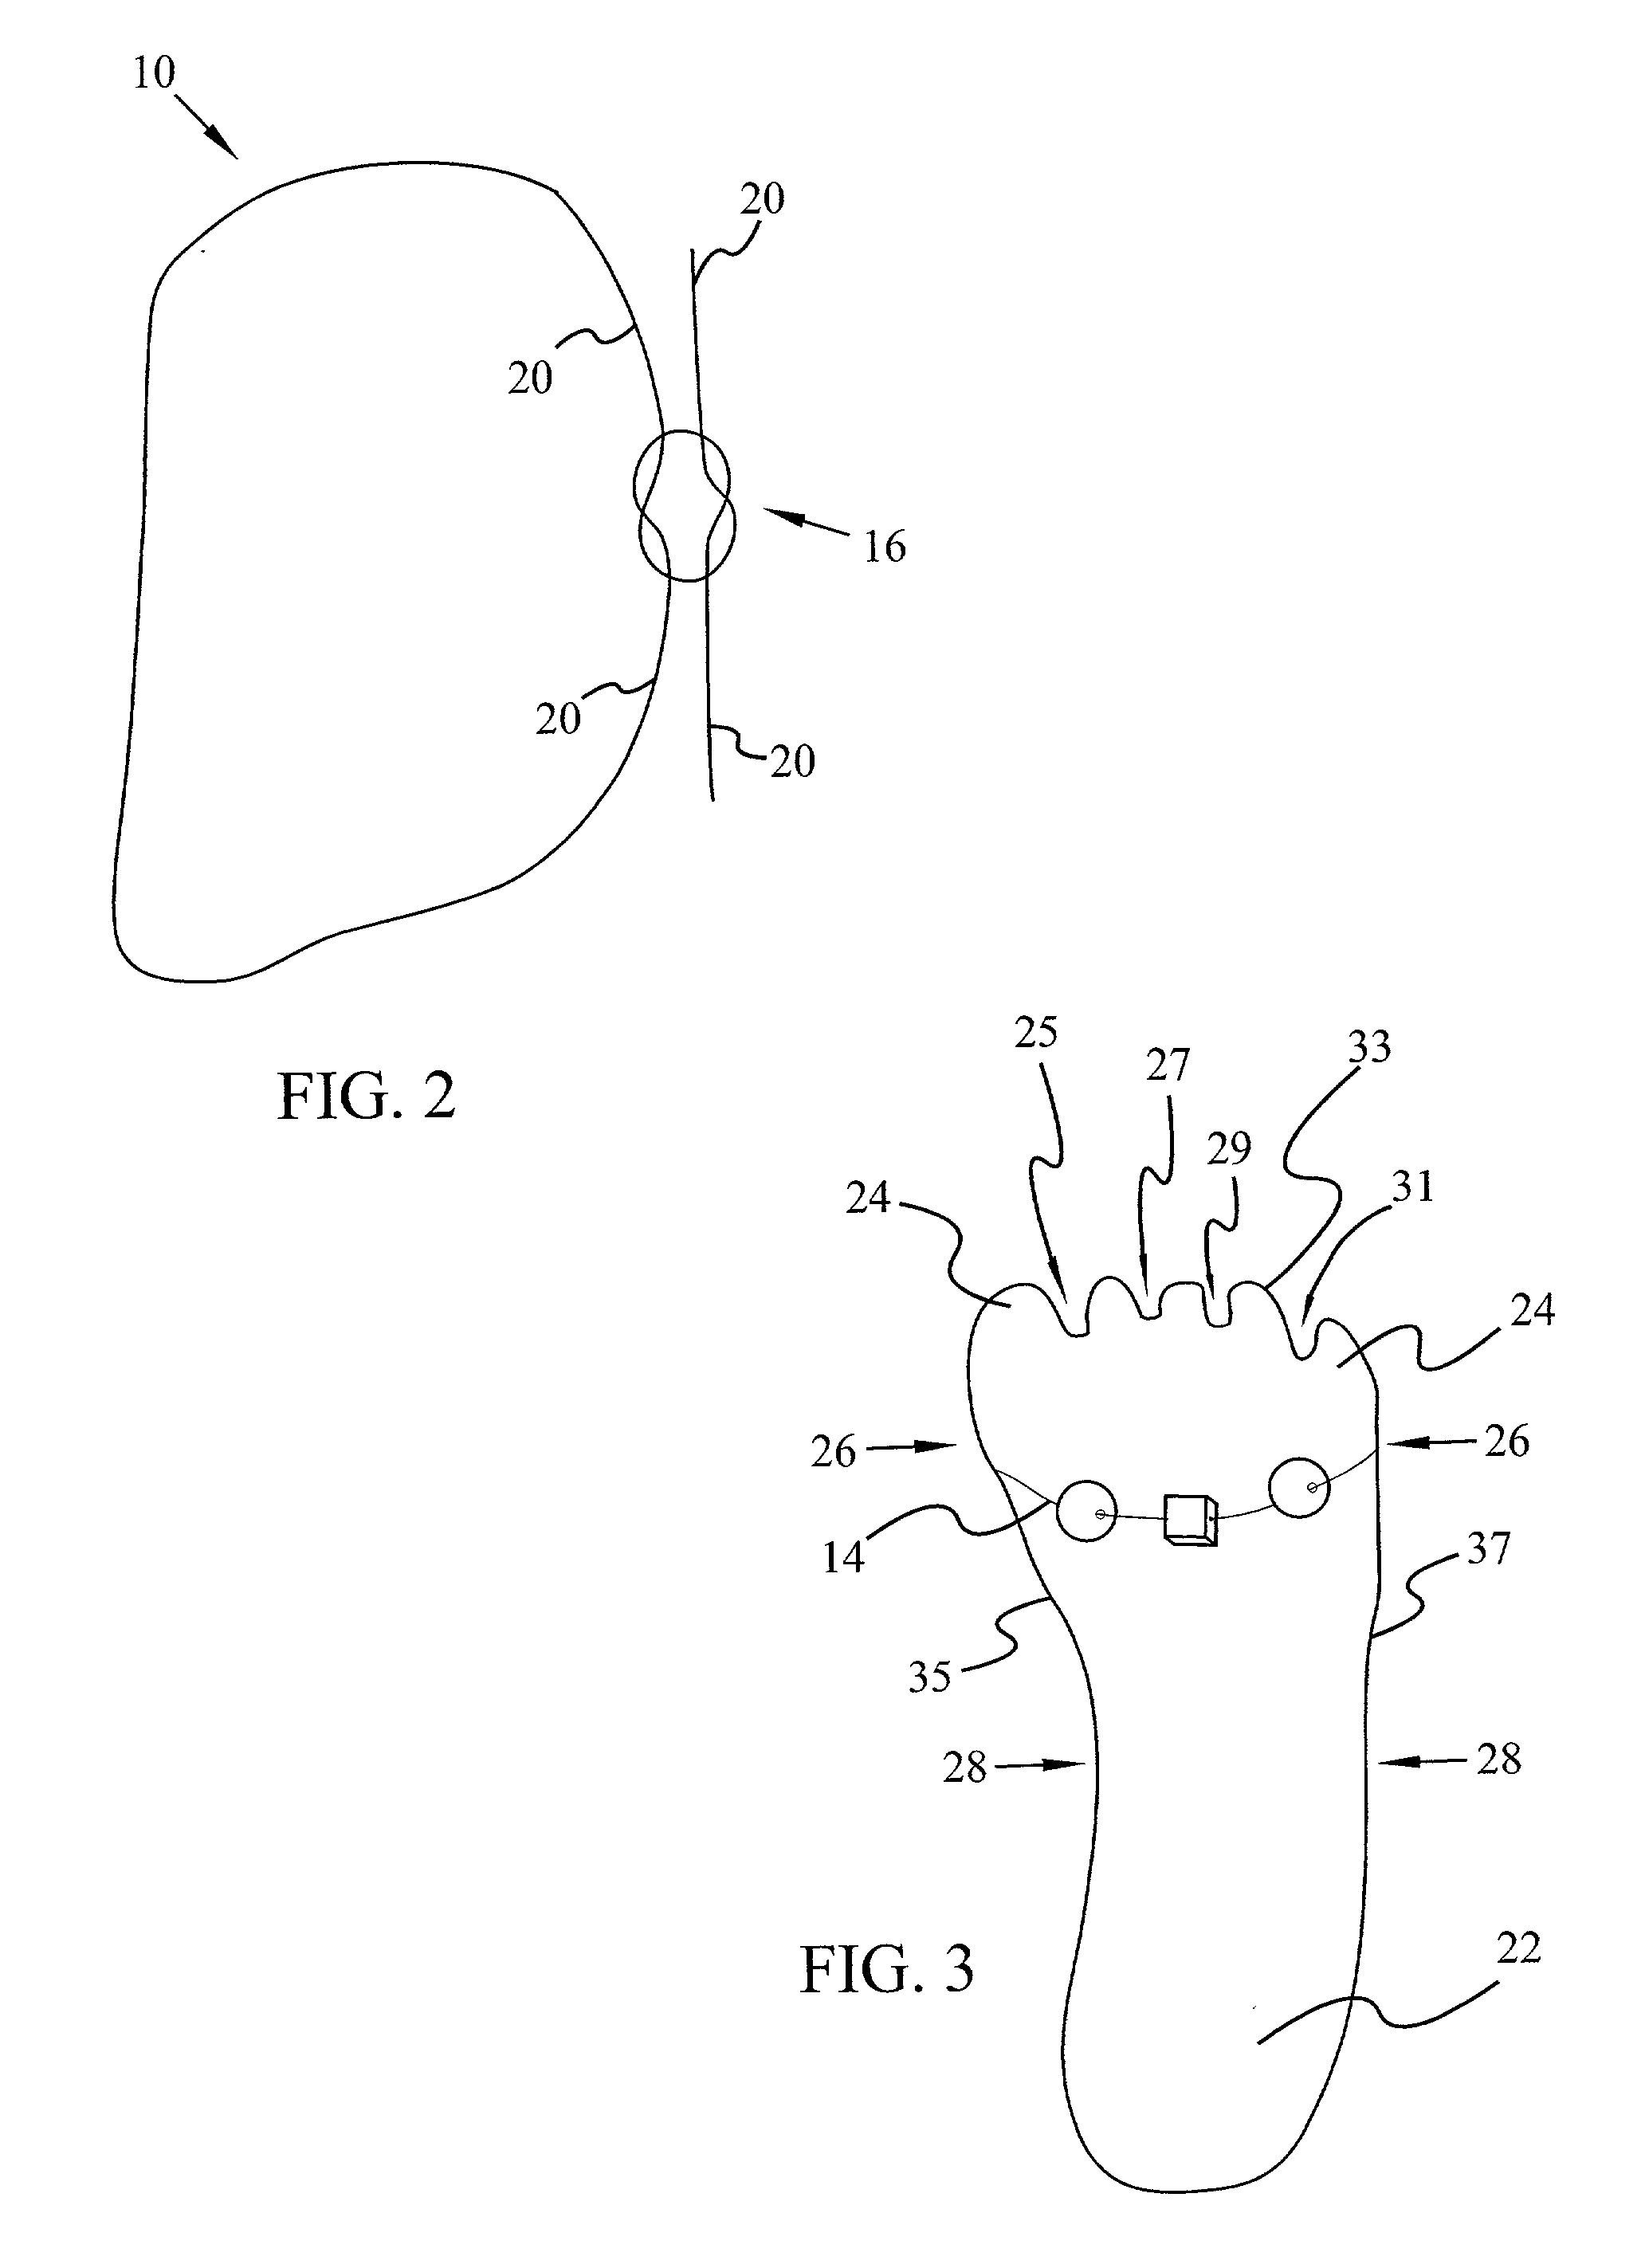 Selectively self-adjustable jewelry item and method of making same